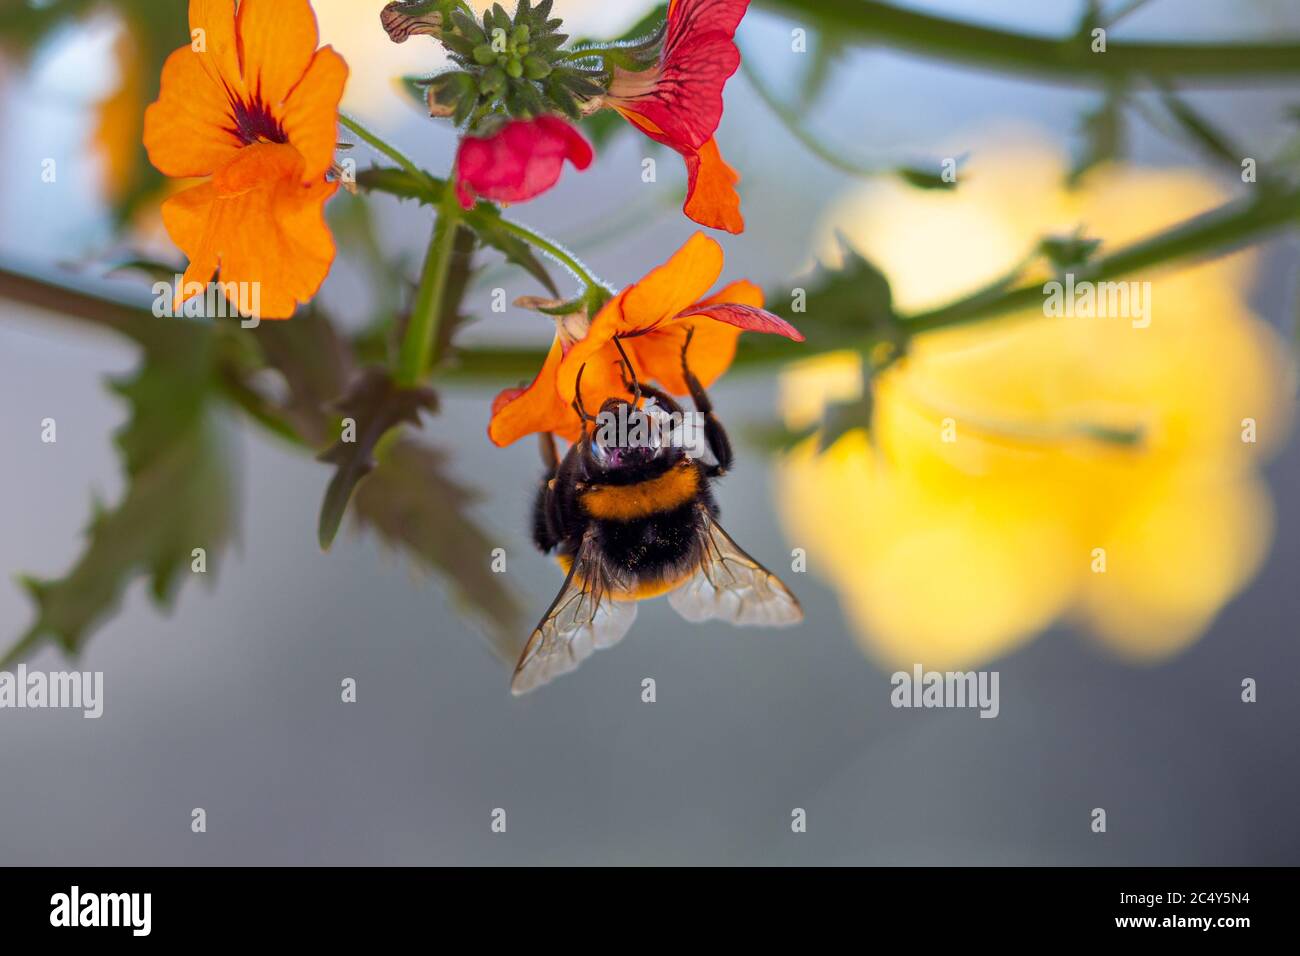 close up of a bumble bee on orange nemesia sunsatia blossom with beautiful blurred bokeh background; save the bees pesticide free biodiversity concept Stock Photo